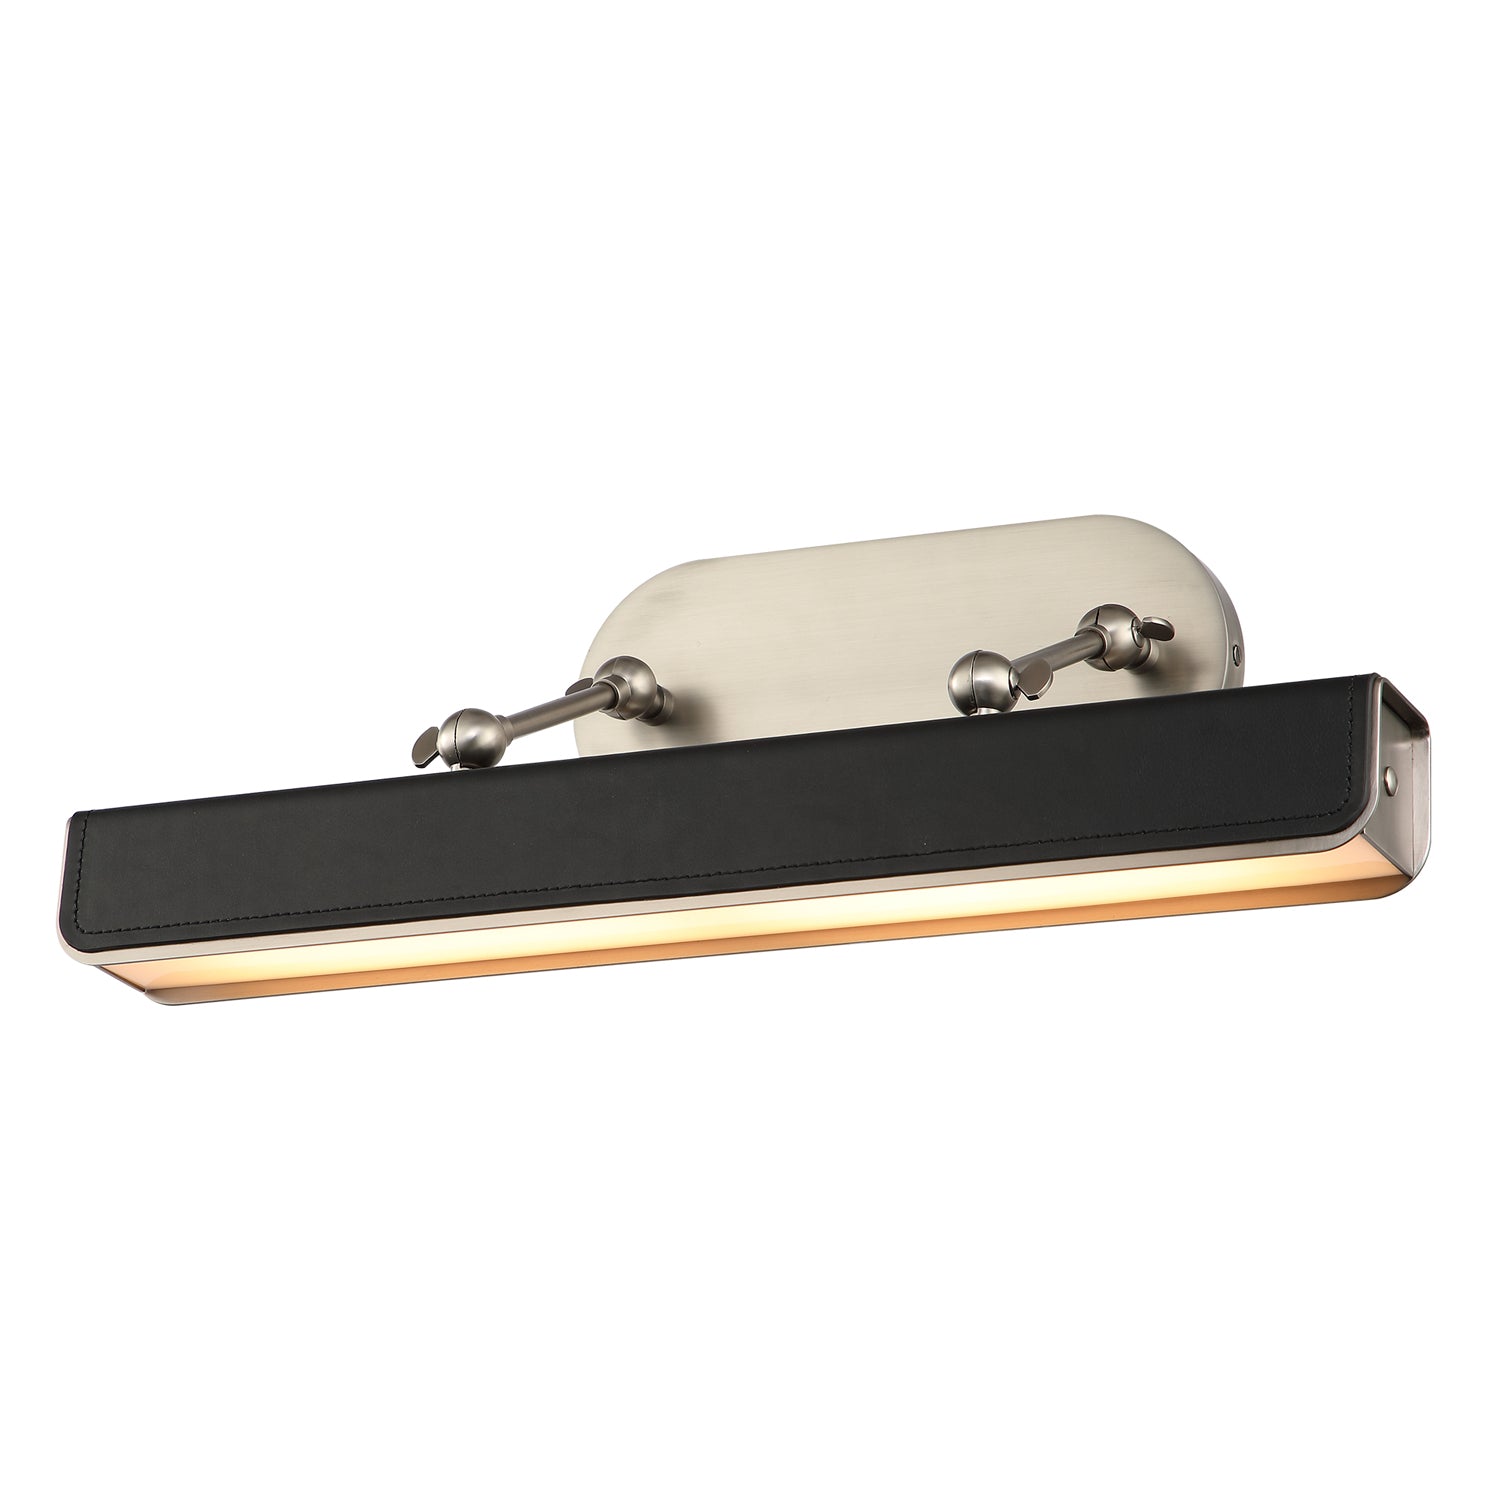 Alora - PL307919ANTL - LED Wall Sconce - Valise Picture - Aged Nickel/Tuxedo Leather